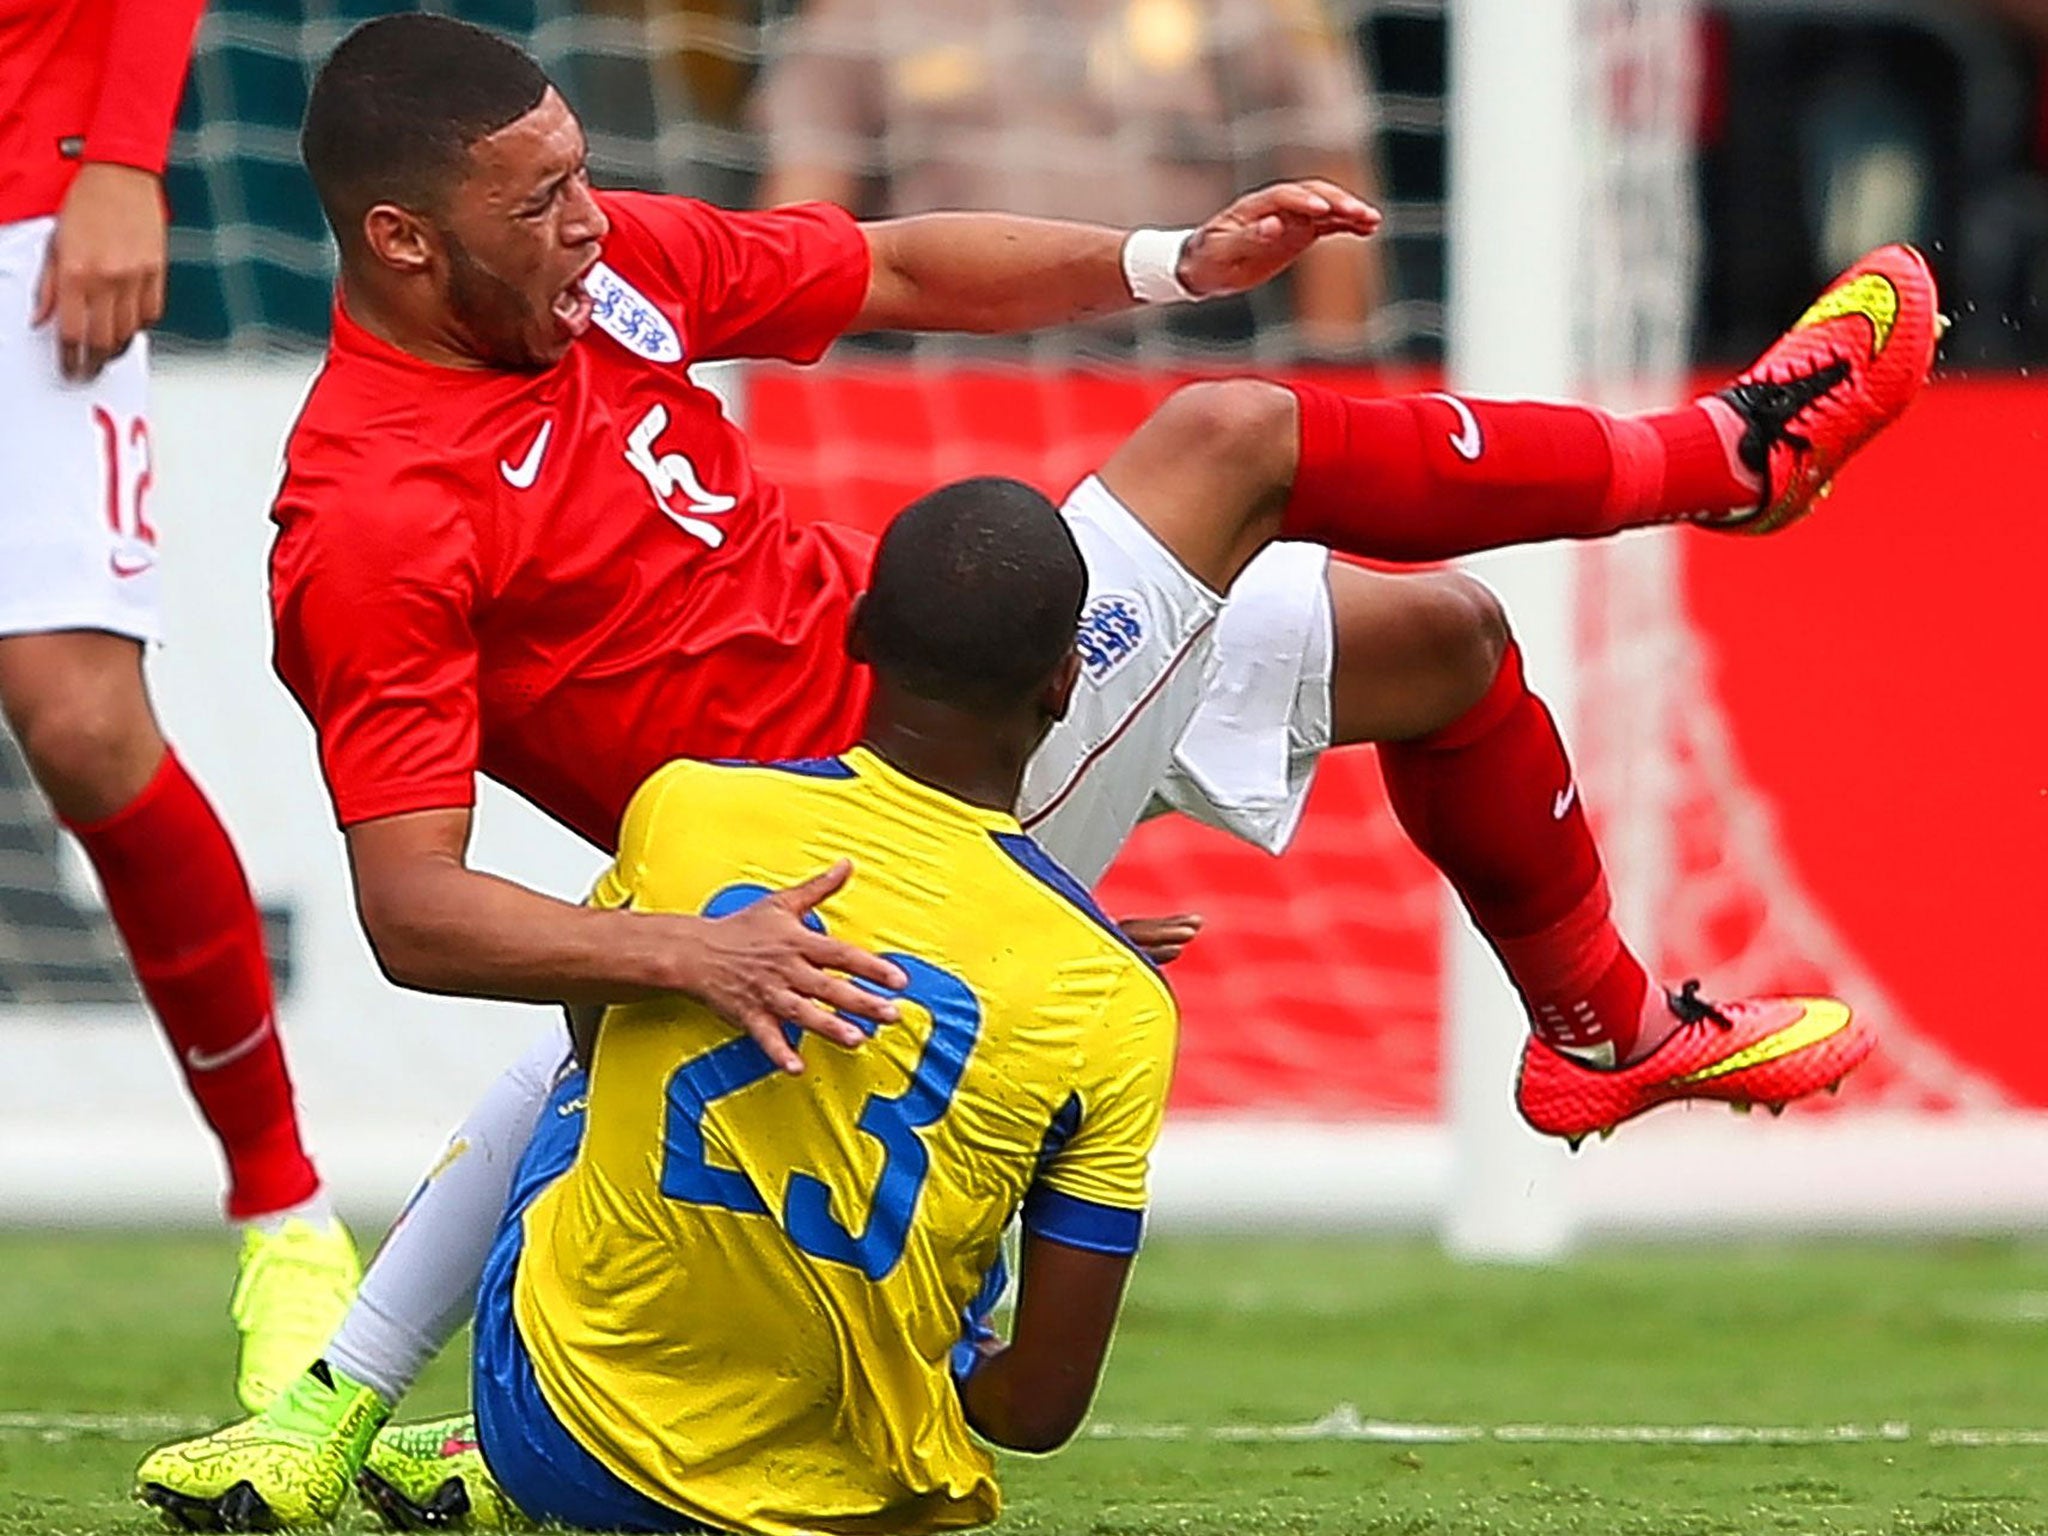 Alex Oxlade-Chamberlain goes down in pain under a challenge from Carlos Gruezo at the Sun Life Stadium in Miami yesterday